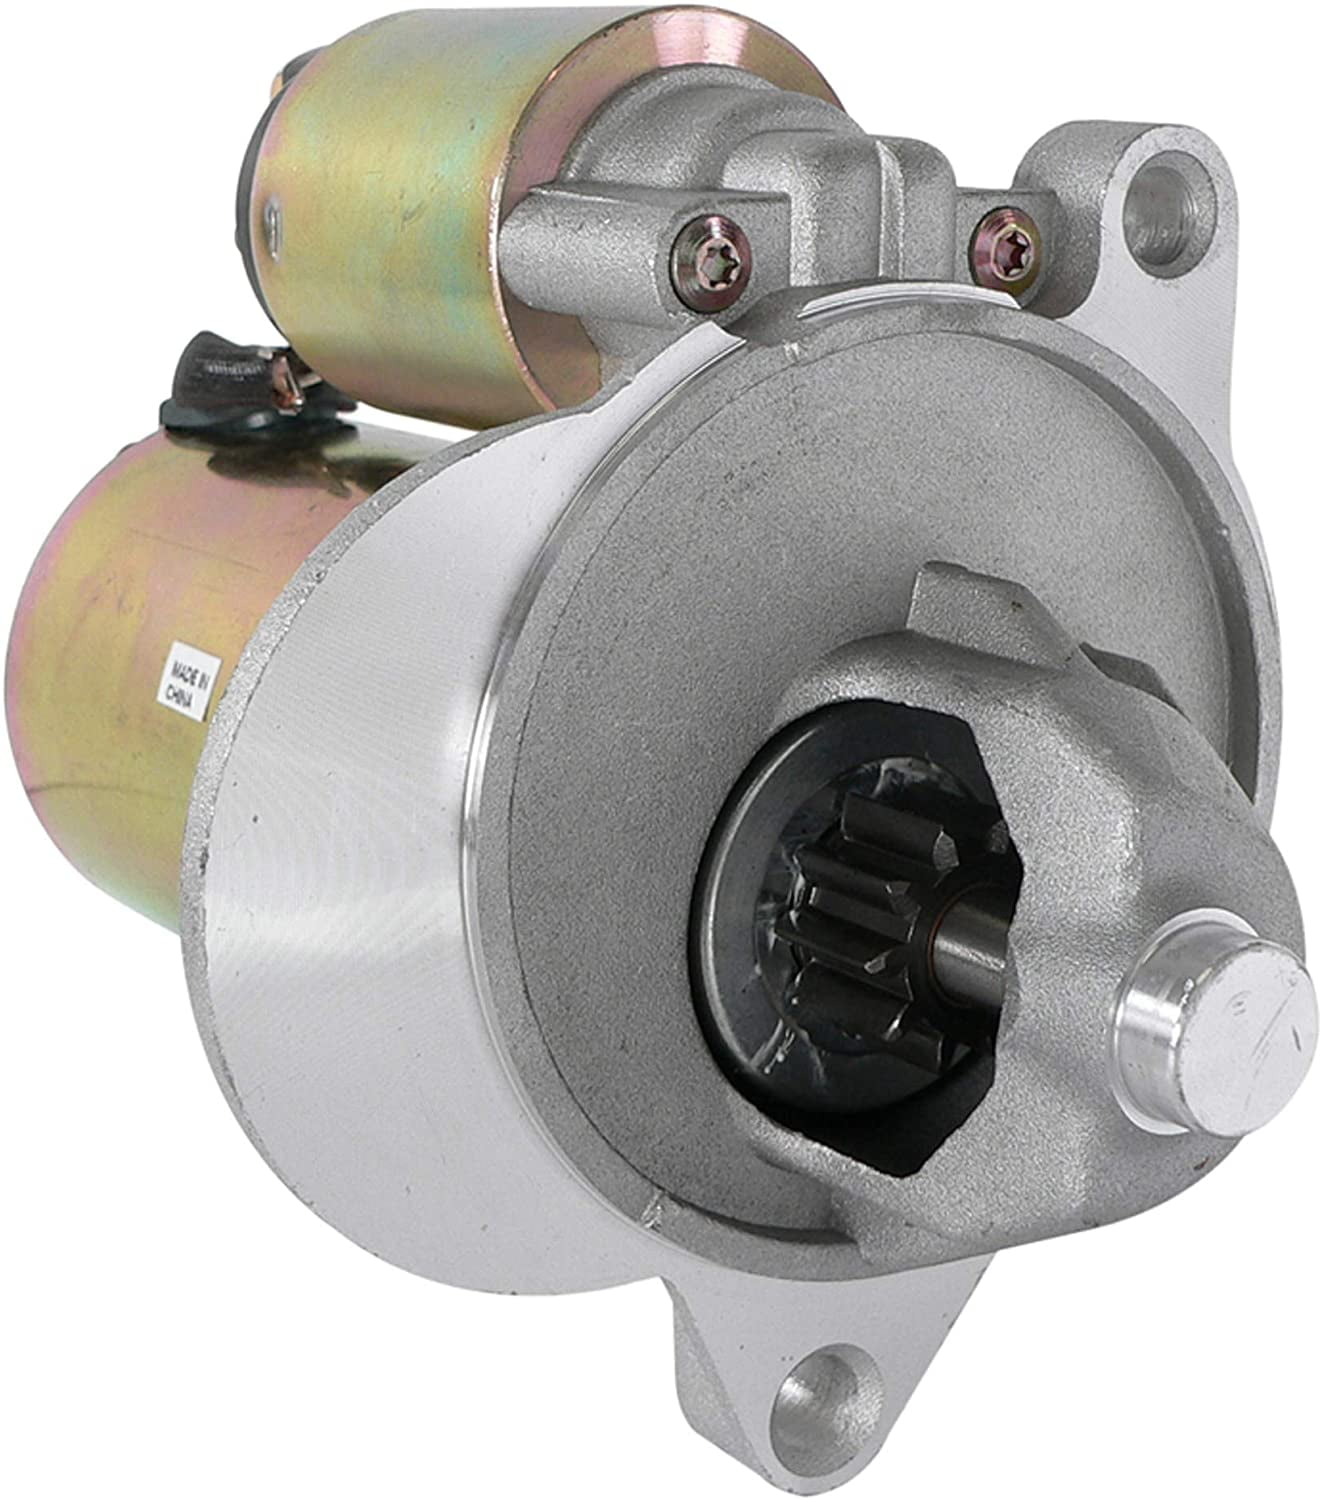 Mercury Auto & Truck Mountaineer 1997 1998 1999 200 2001 SA851 DB Electrical SFD0040 Starter Compatible With/Replacement For 5.0L Ford Auto & Truck Explorer 1996 1997 1998 1999 2000 2001 